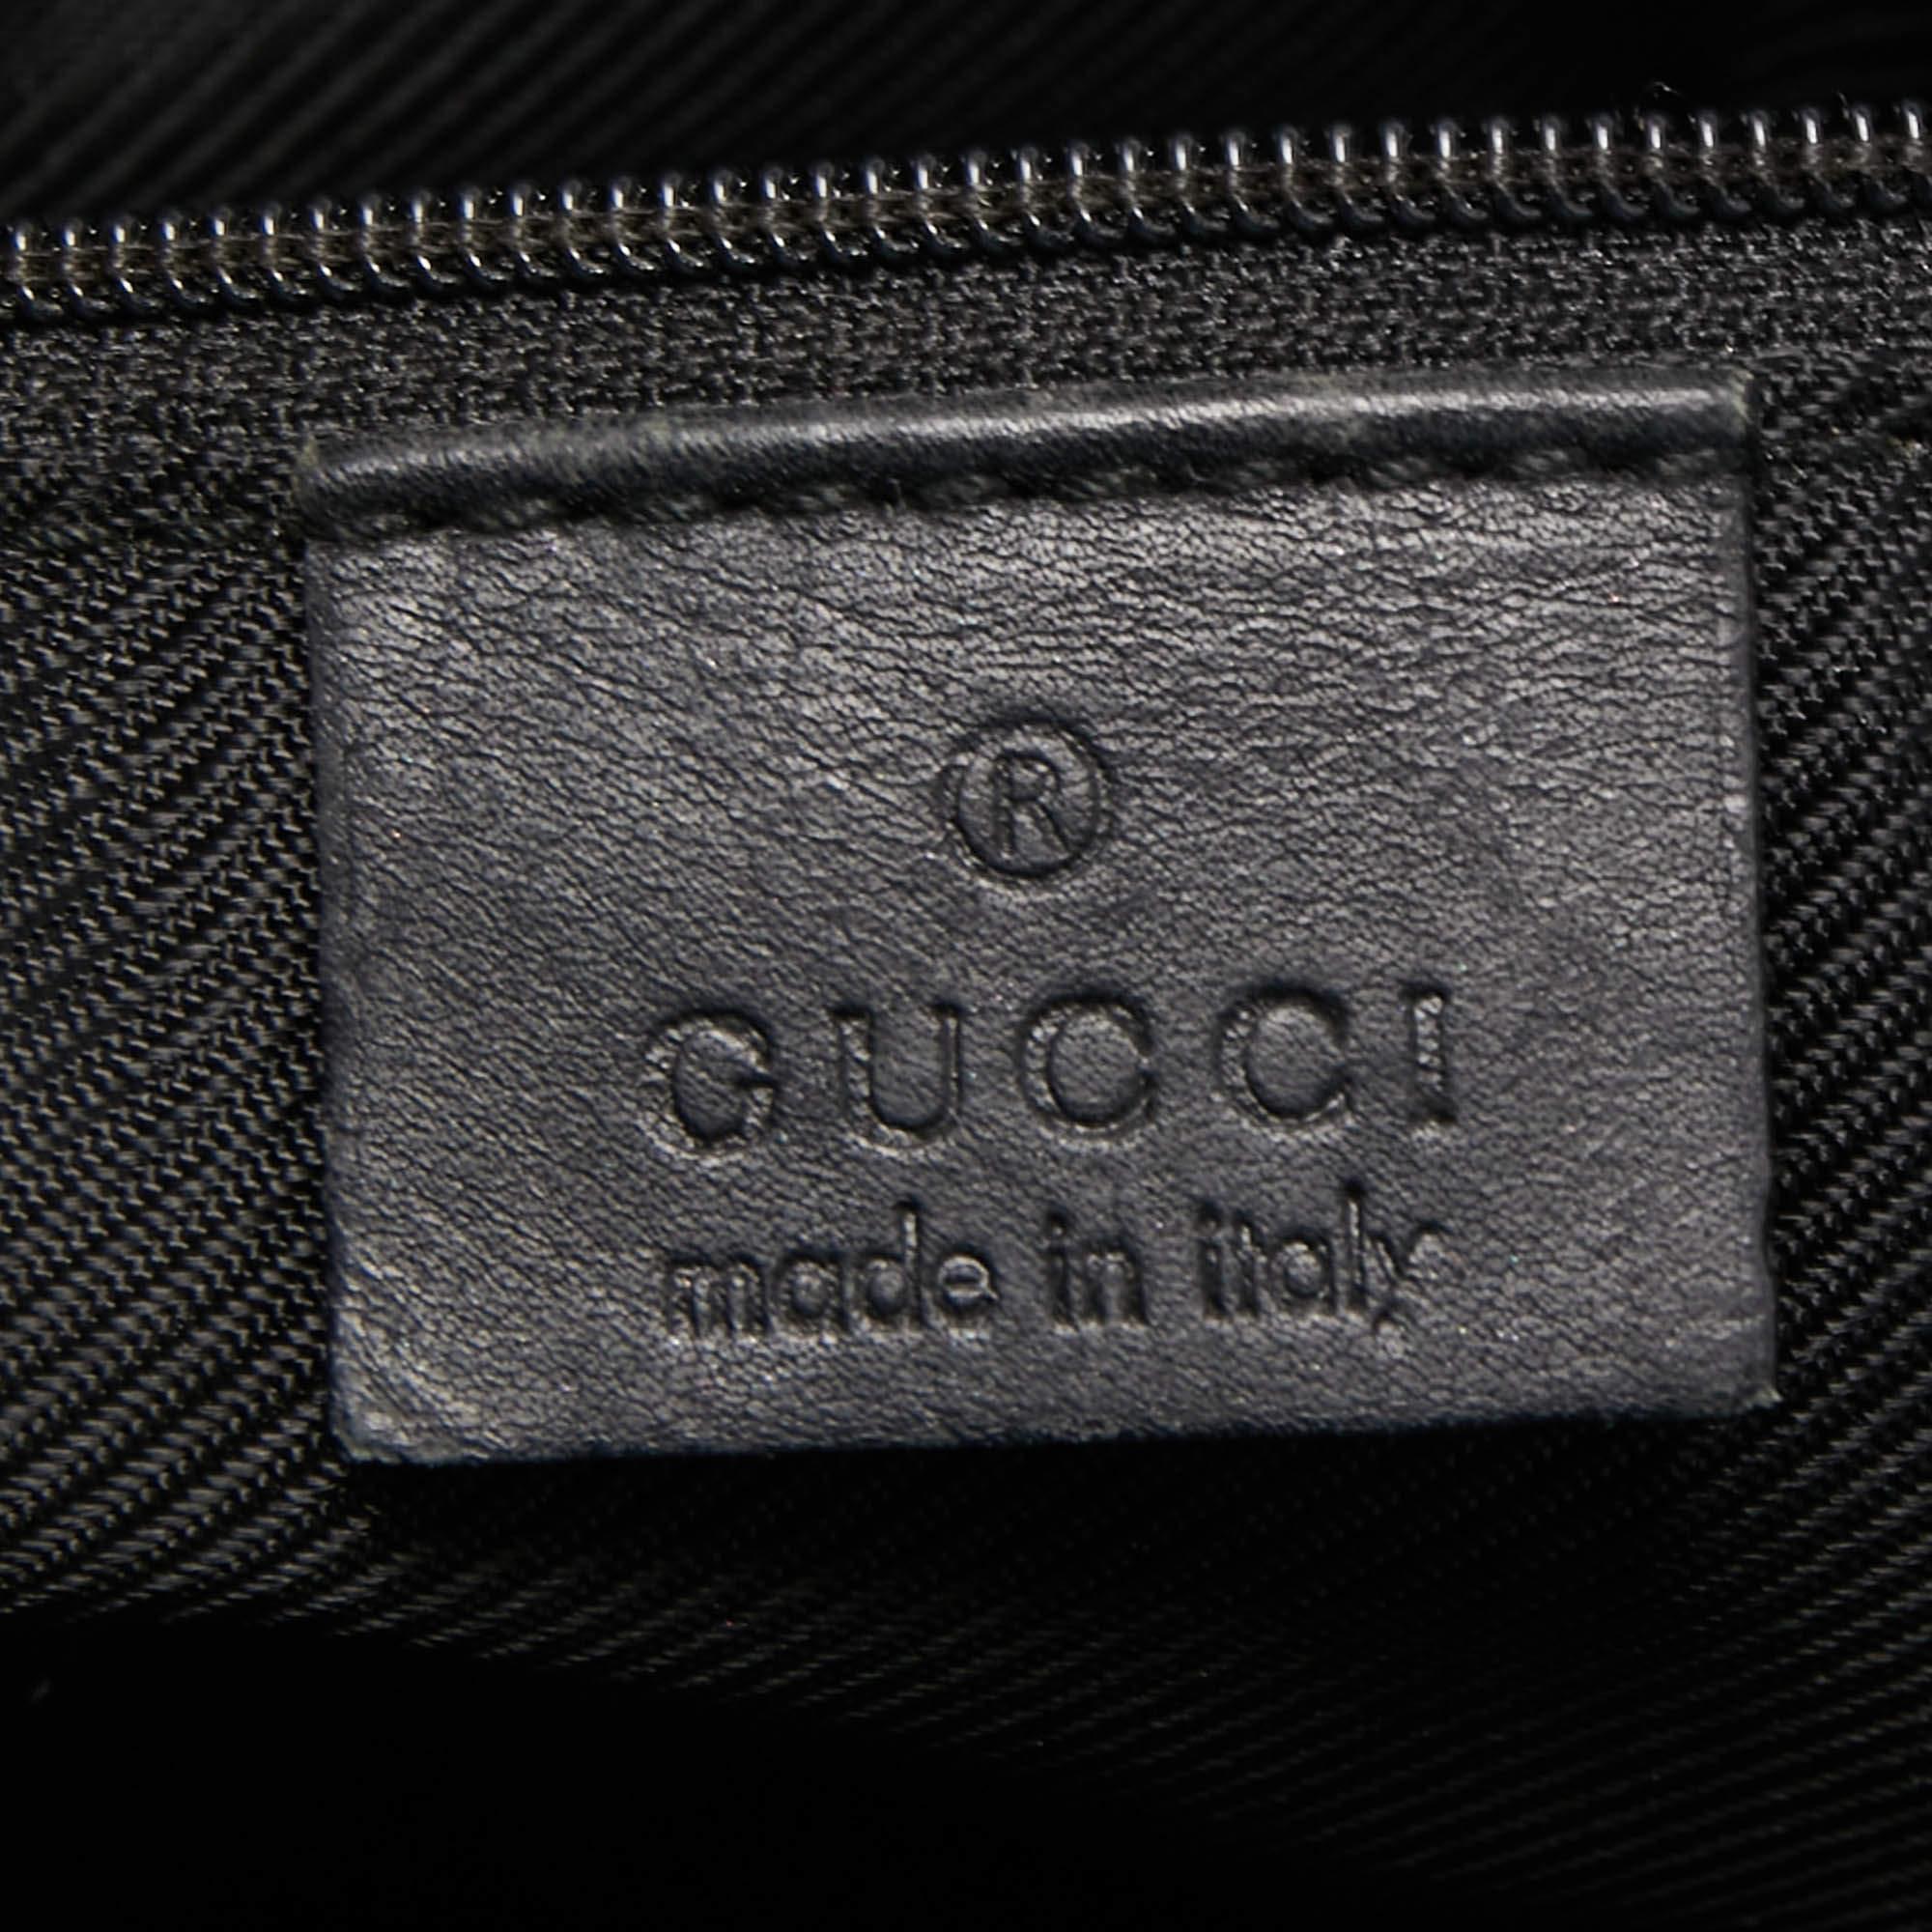 Gucci Black GG Canvas and Leather Shoulder Bag 5